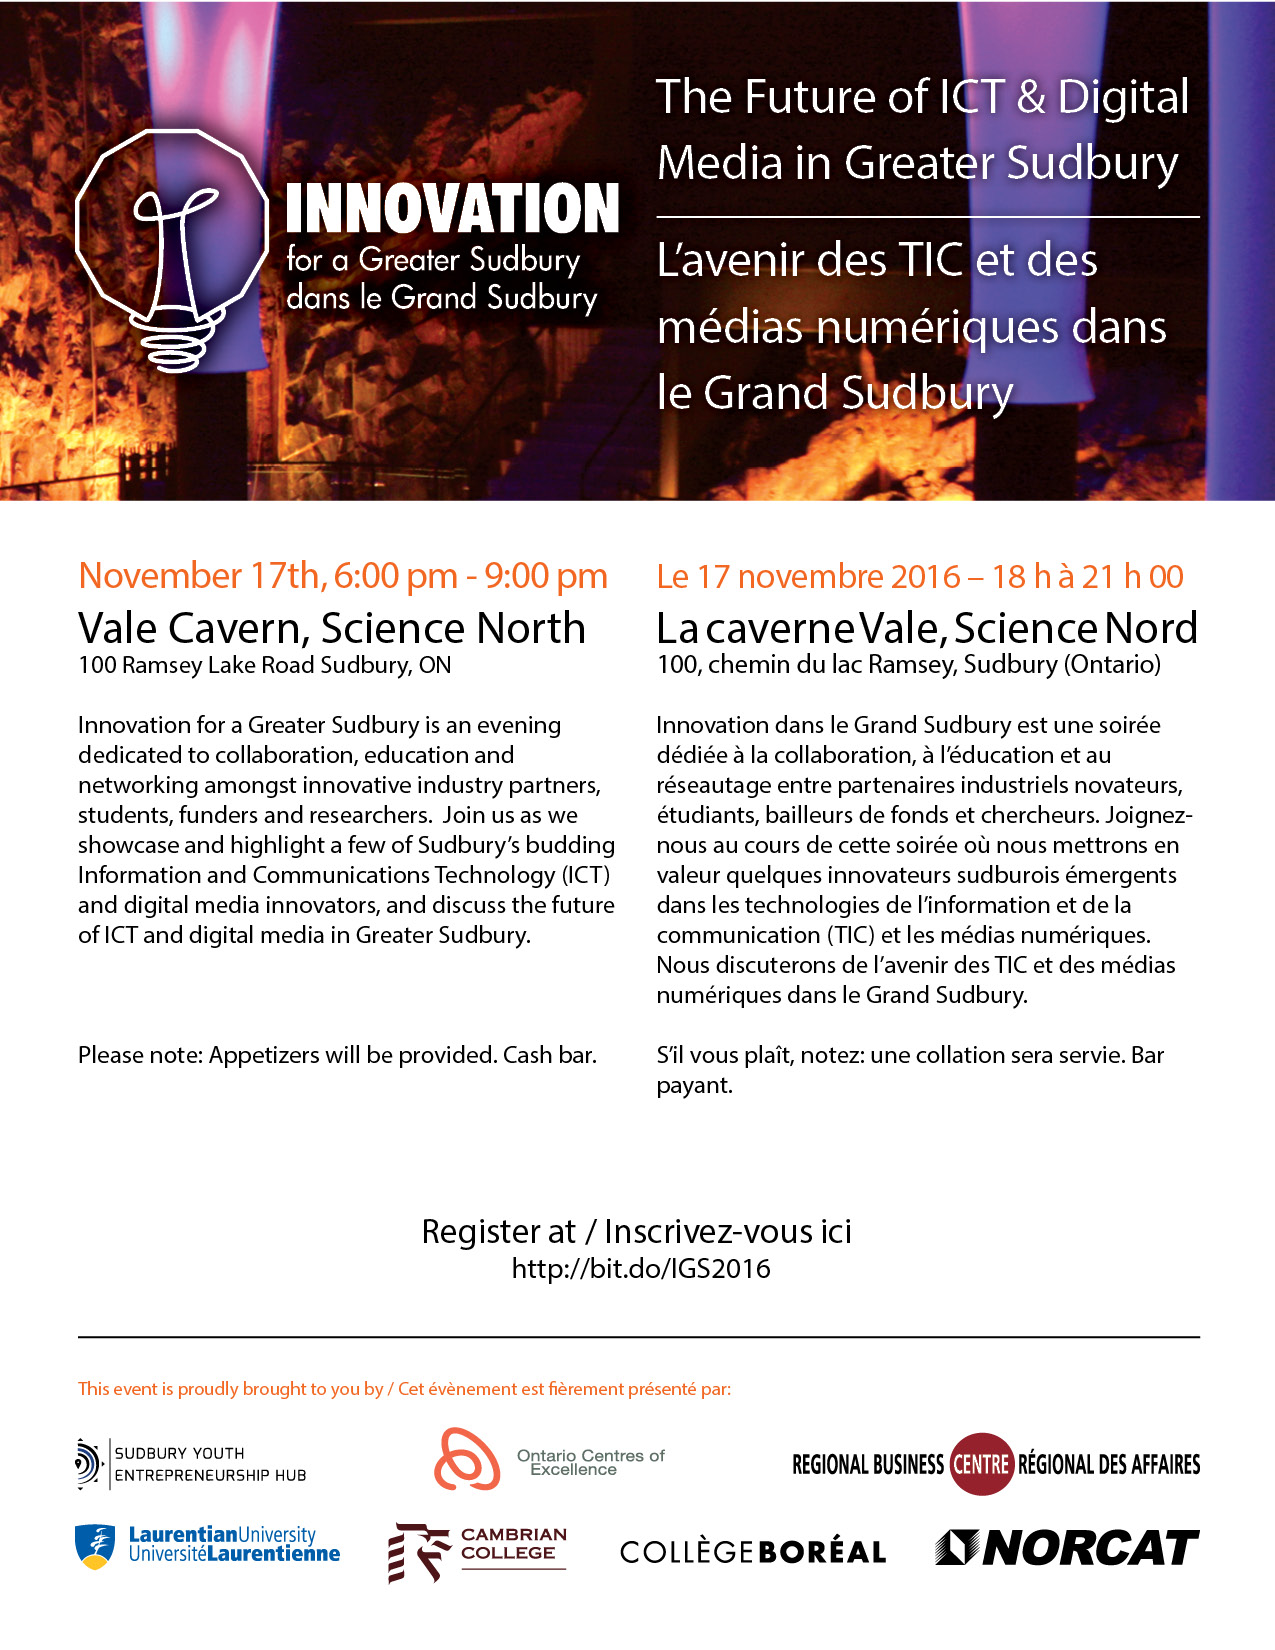 Hear about the future of ICT at Innovation for a Greater Sudbury